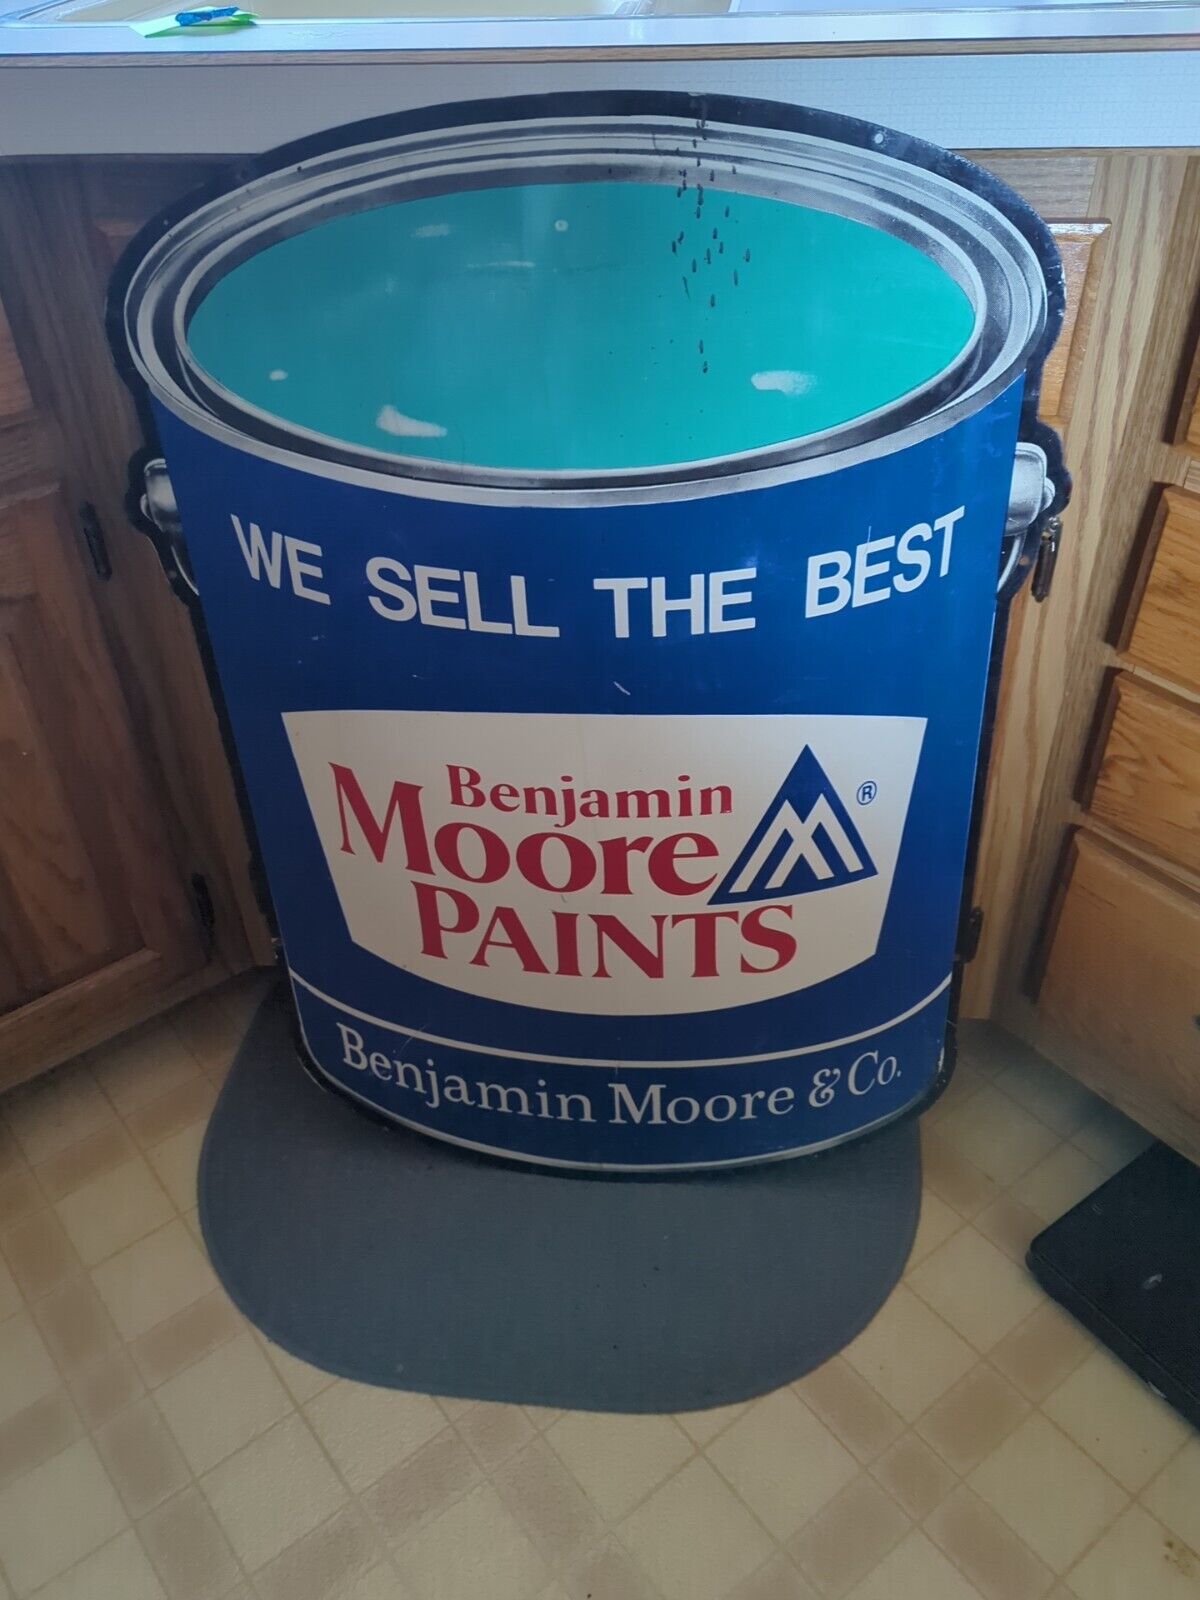 Benjamin Moore Co Paints Die Cut Can sign Metal 35” Tall - We Sell The Best 